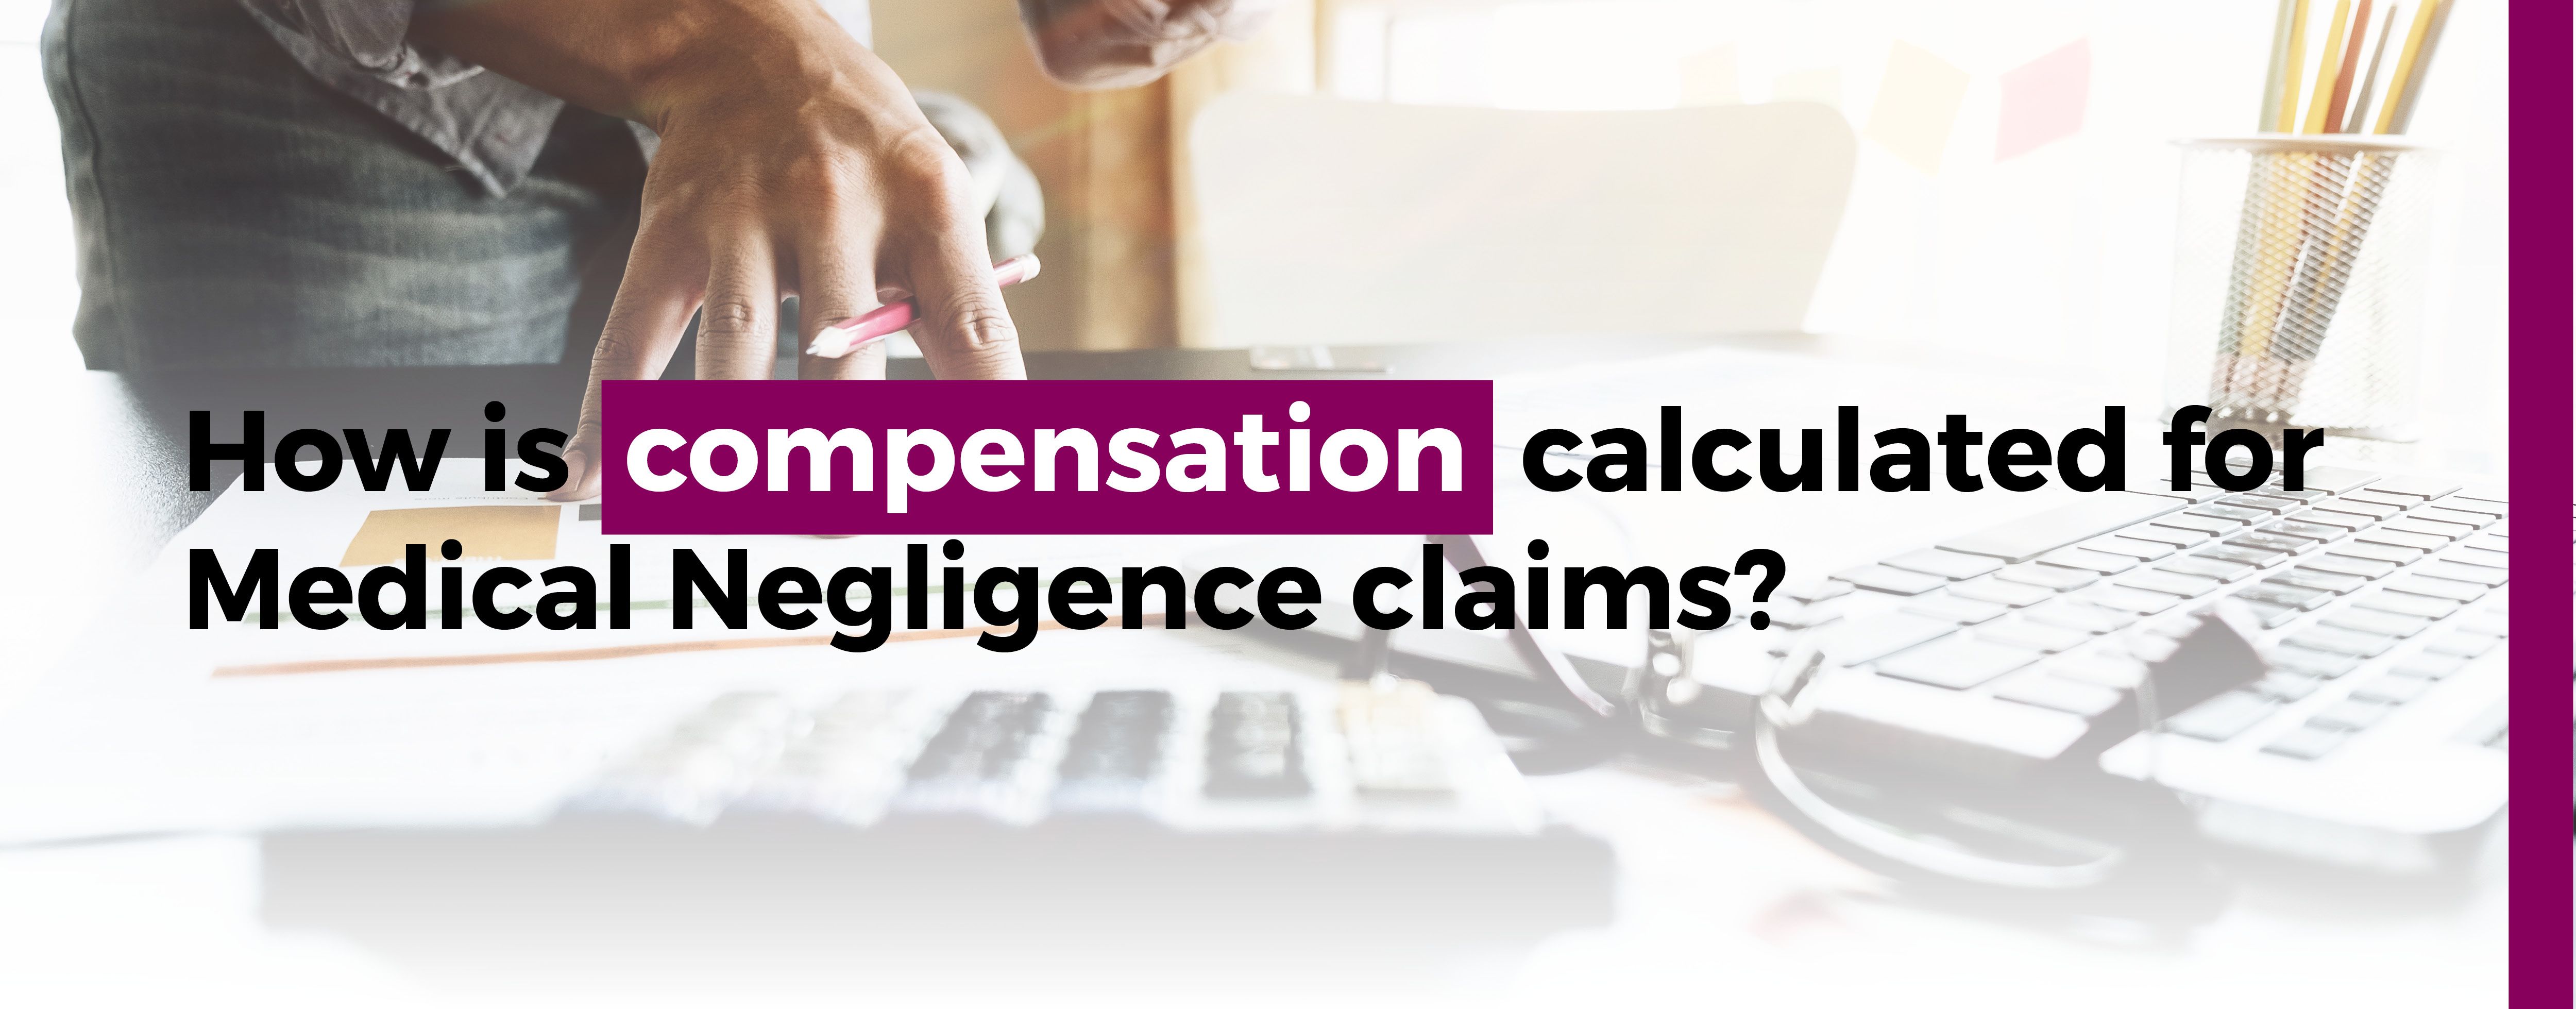 How is compensation calculated for medical negligence claims?